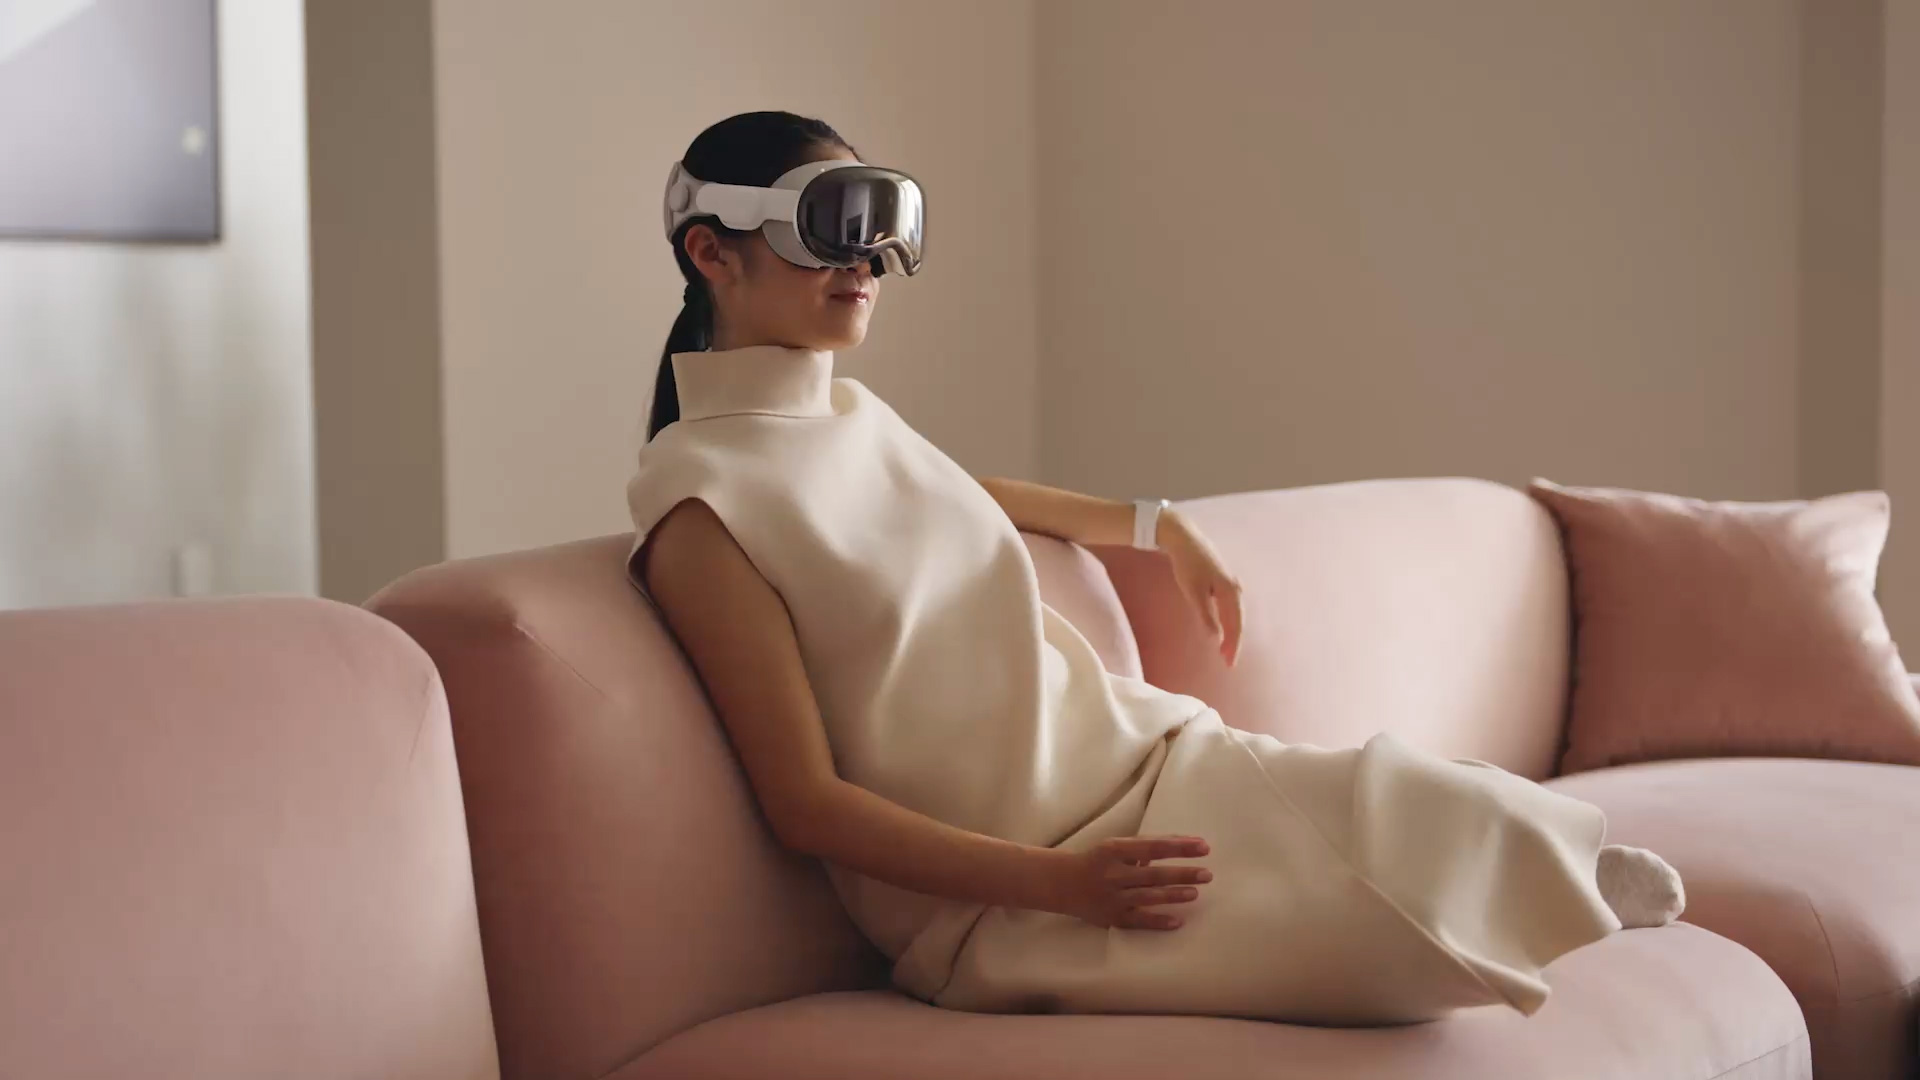 Image of a person wearing the Apple Vision Pro